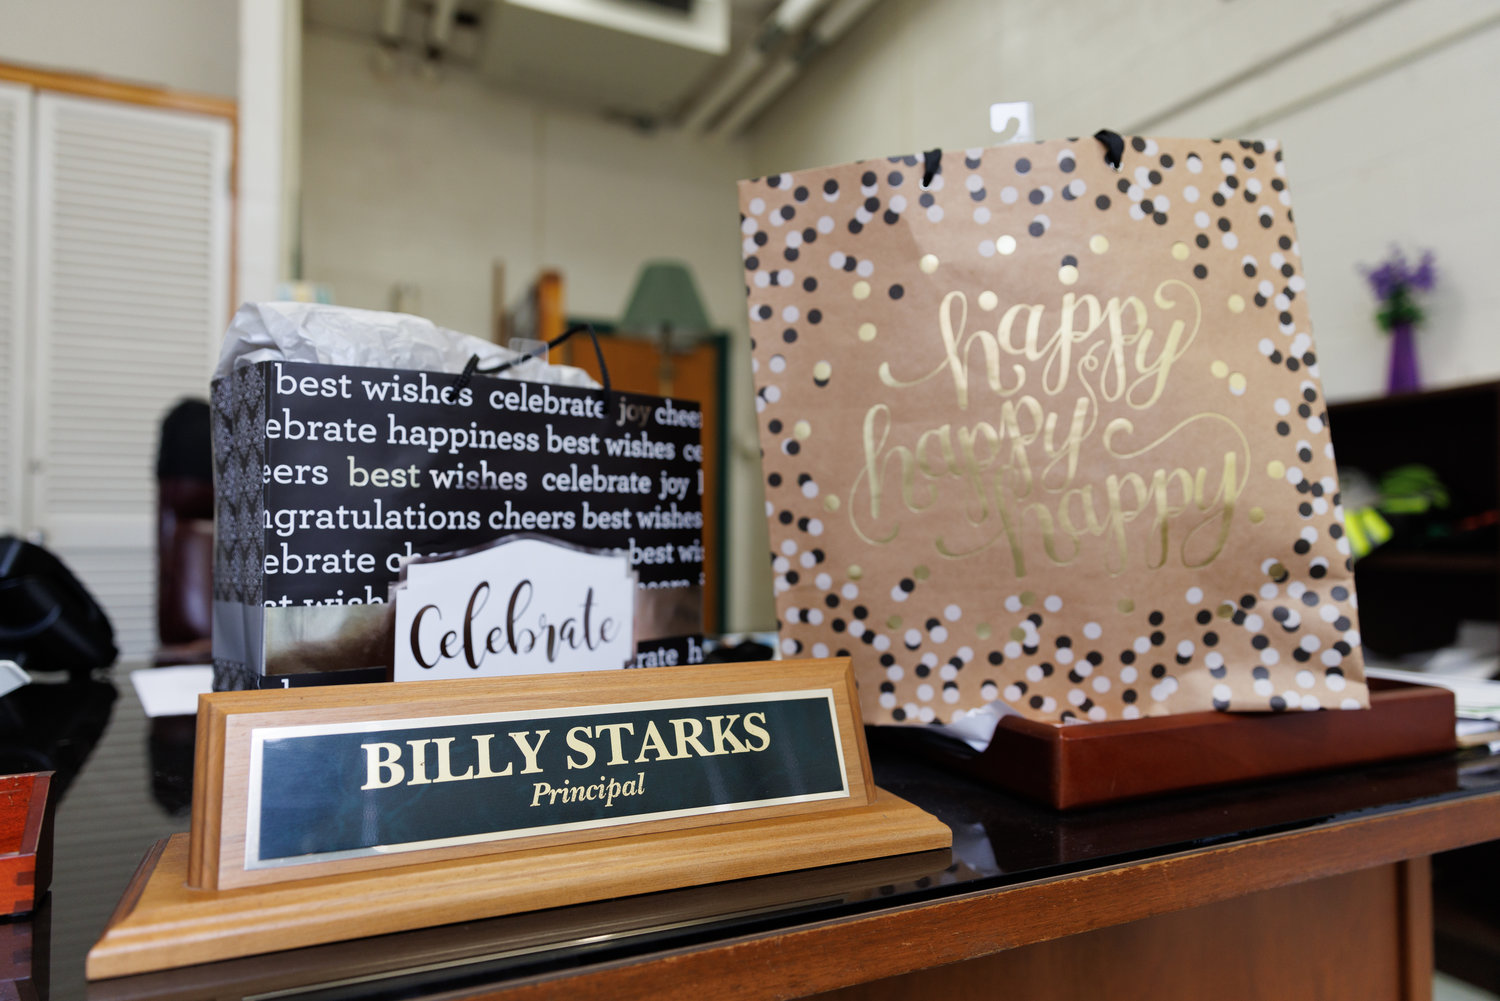 Some of the items marking Billy Starks' retirement on Friday. Starks, the principal of Pine Forest Middle School, retired after 45 years as an educator.